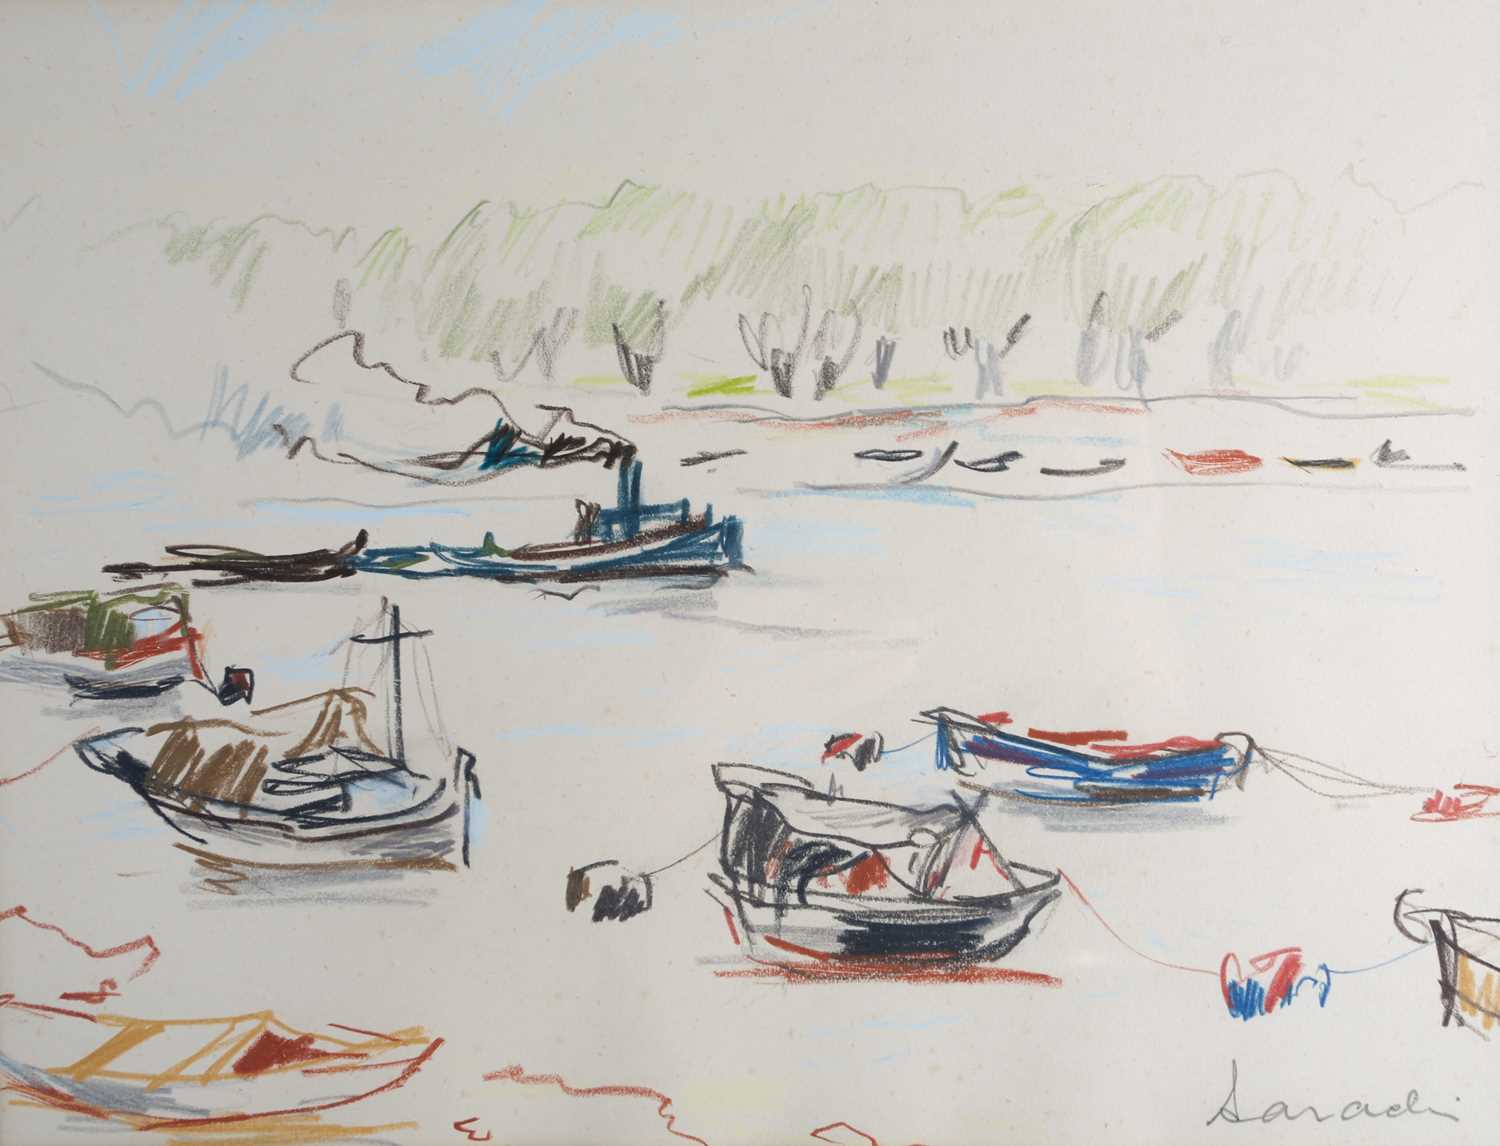 Chatin Sarachi (Albanian, 1899-1974) 'Tug and moored boats', crayon on paper, together with a - Image 5 of 6